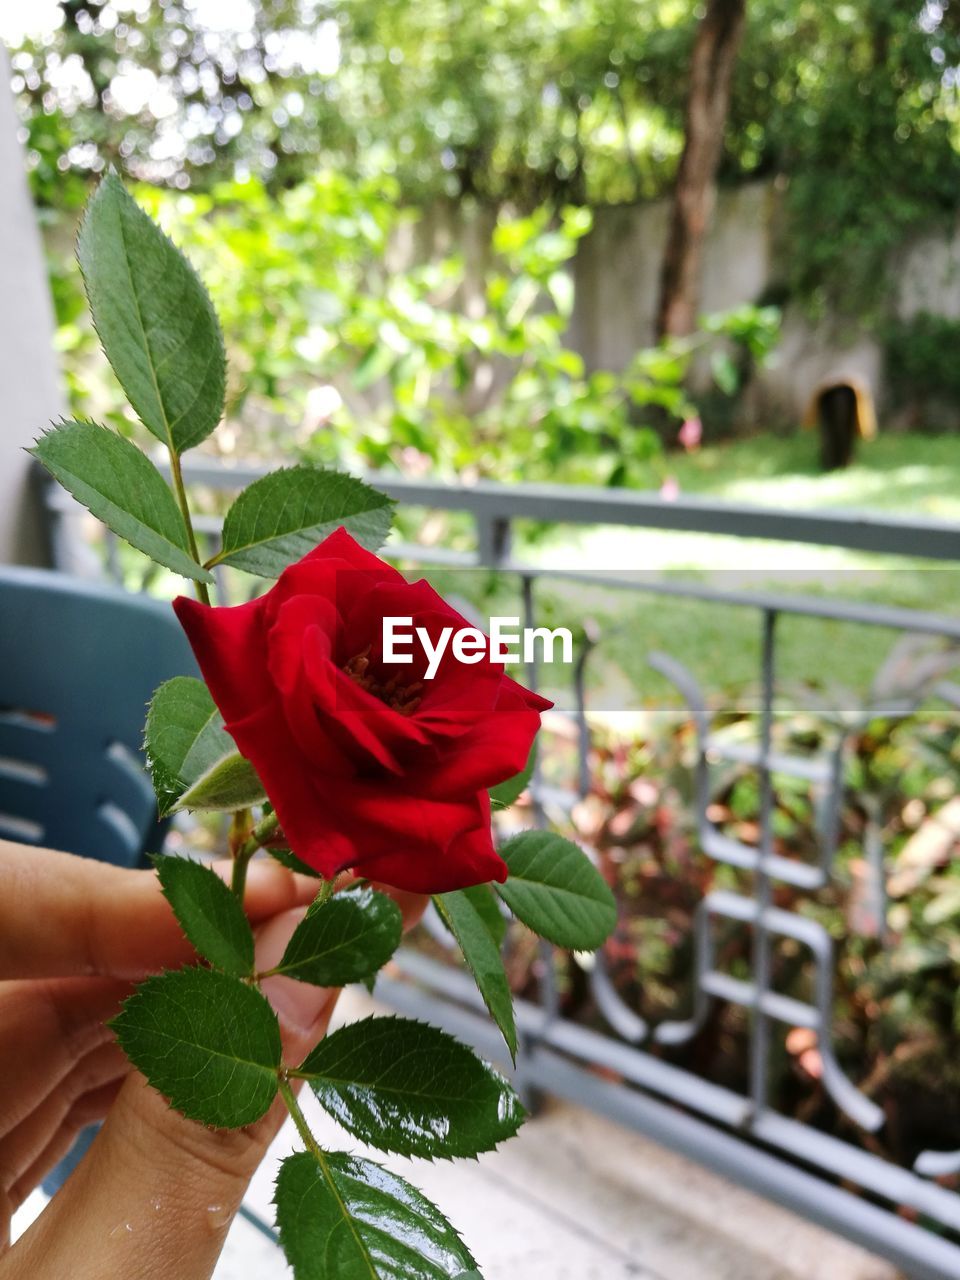 Cropped hand holding red rose in balcony